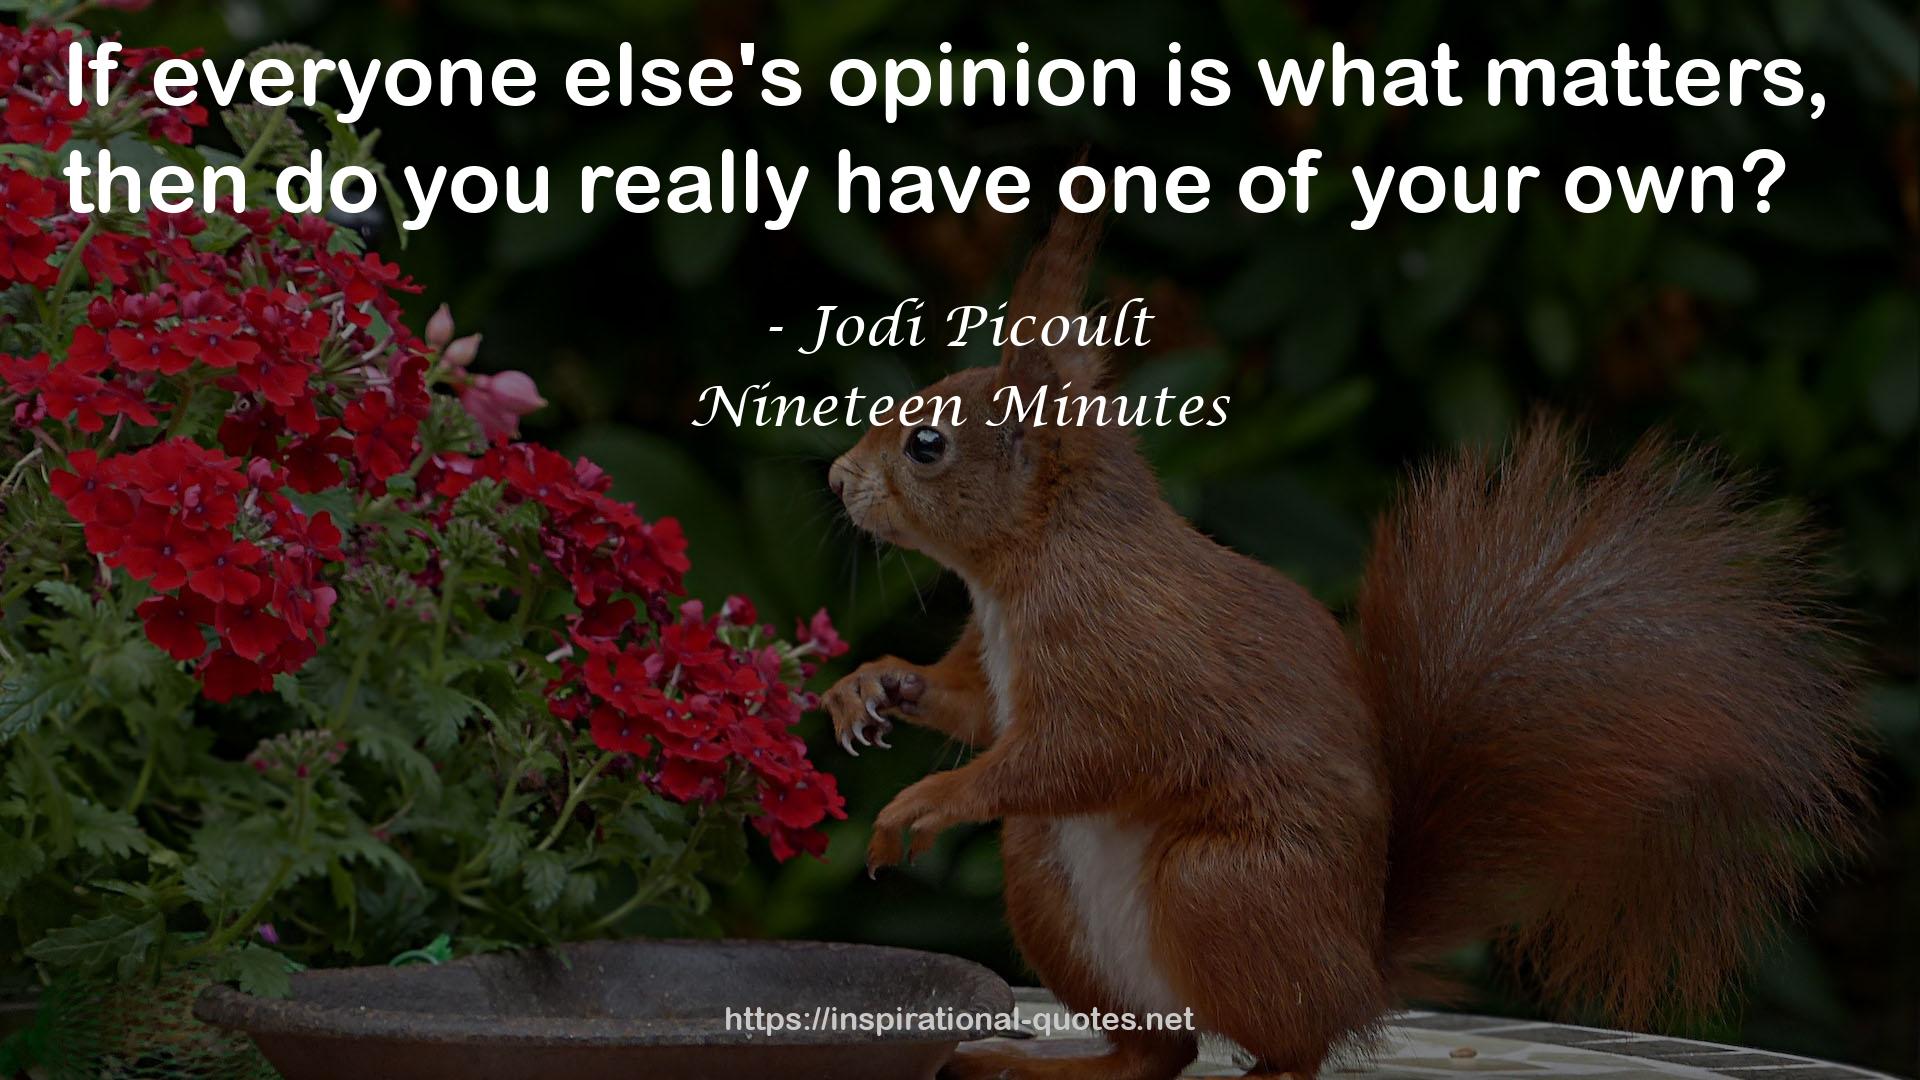 Nineteen Minutes QUOTES